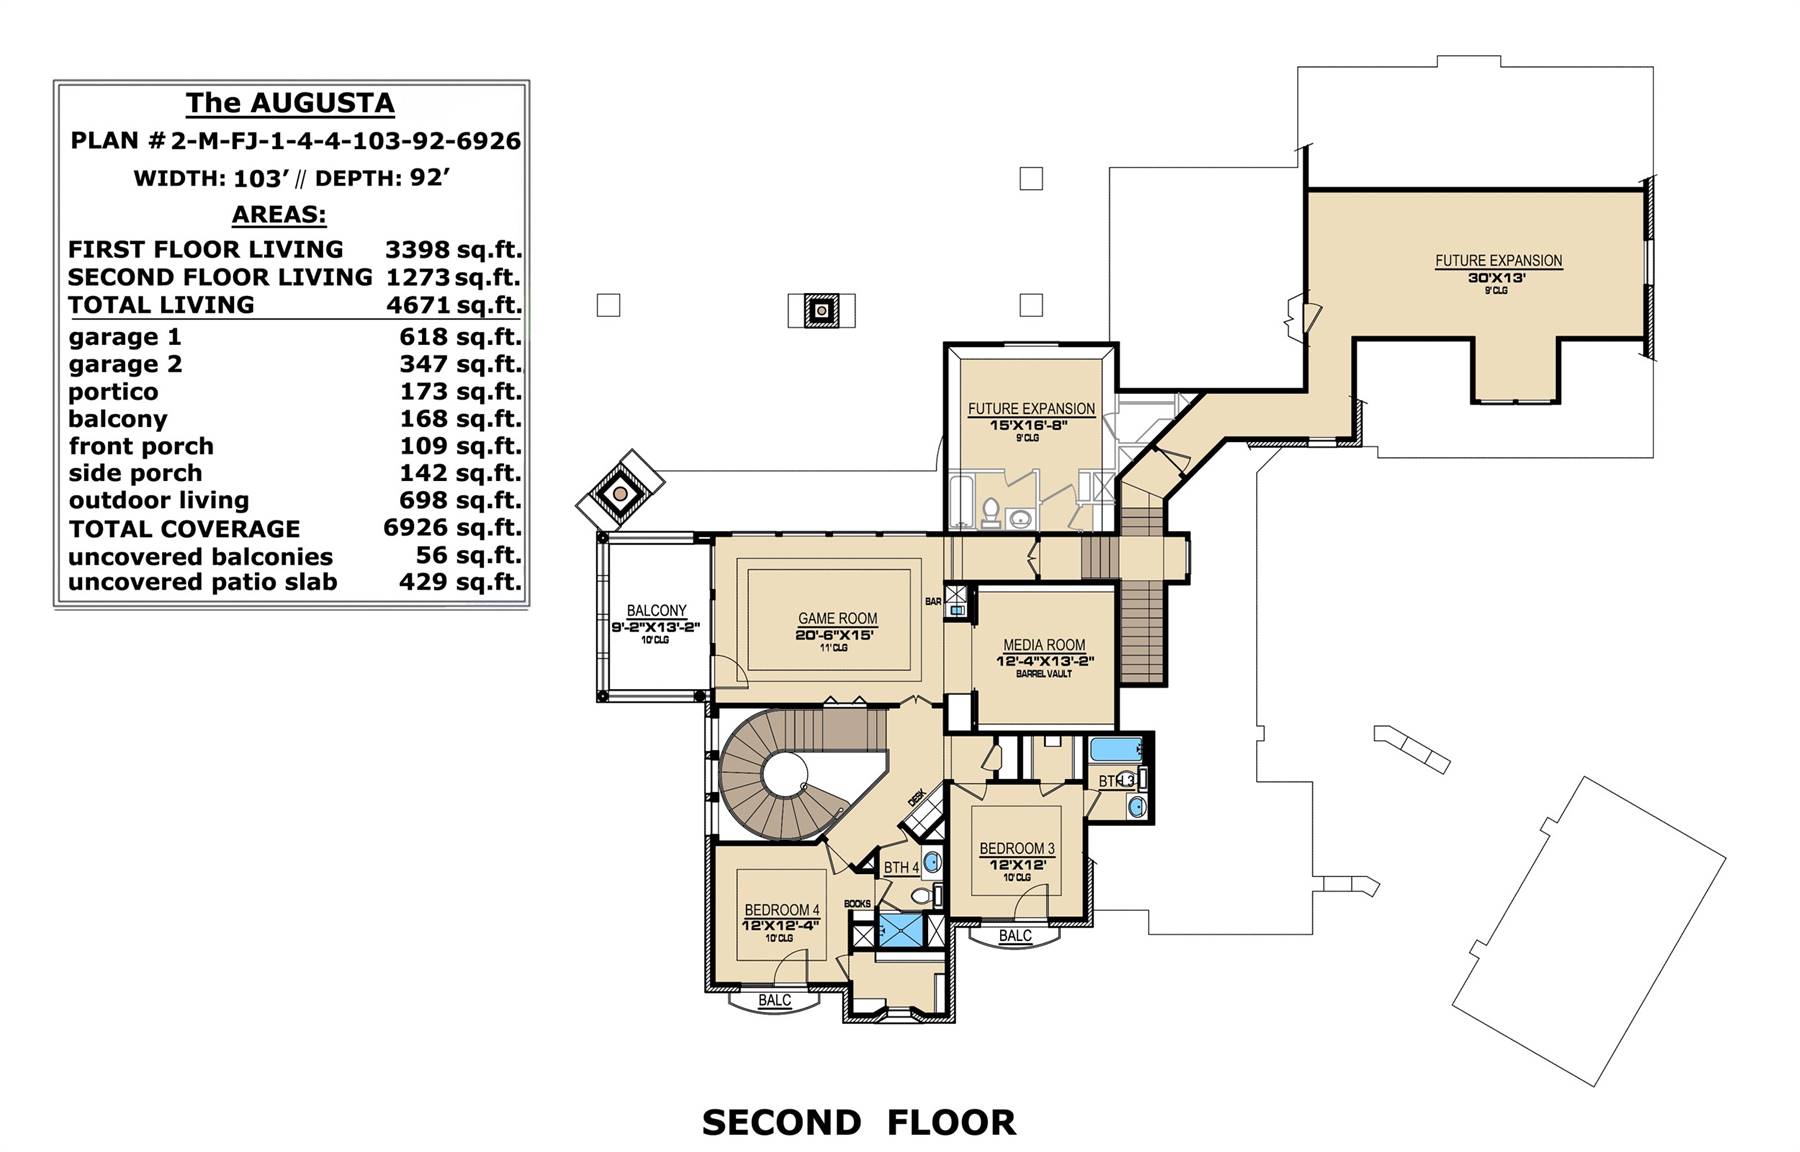 2nd Floor image of Augusta House Plan